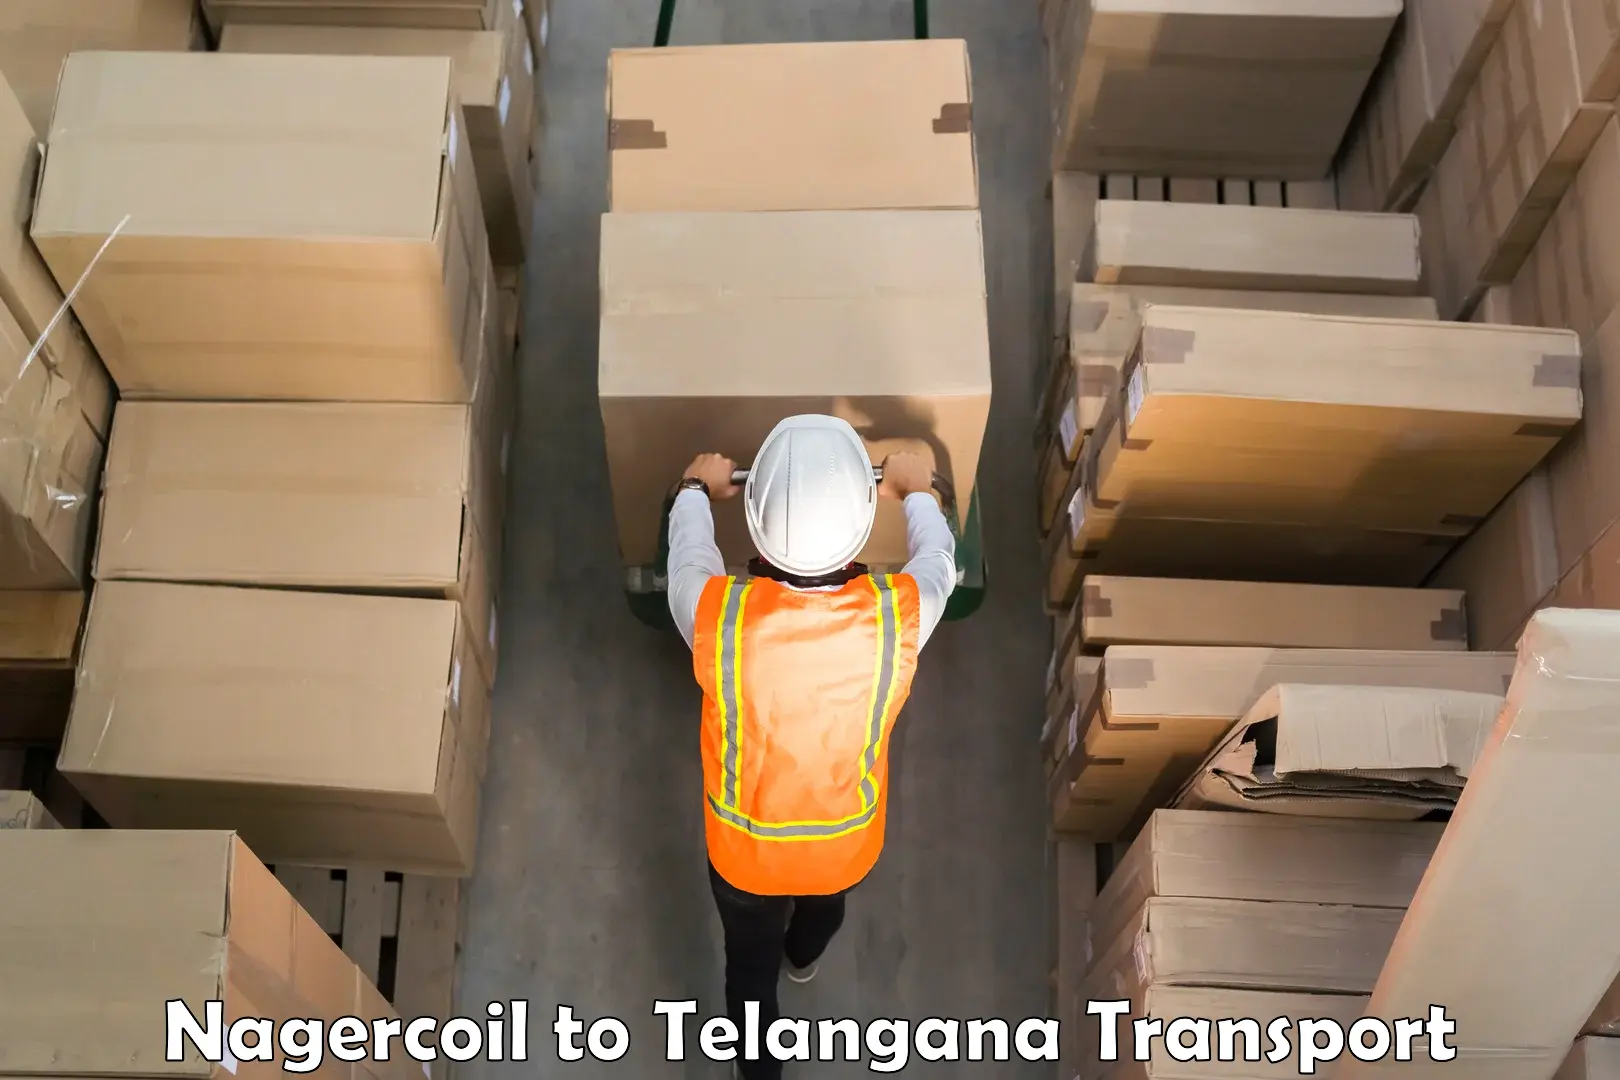 Container transport service Nagercoil to Telangana